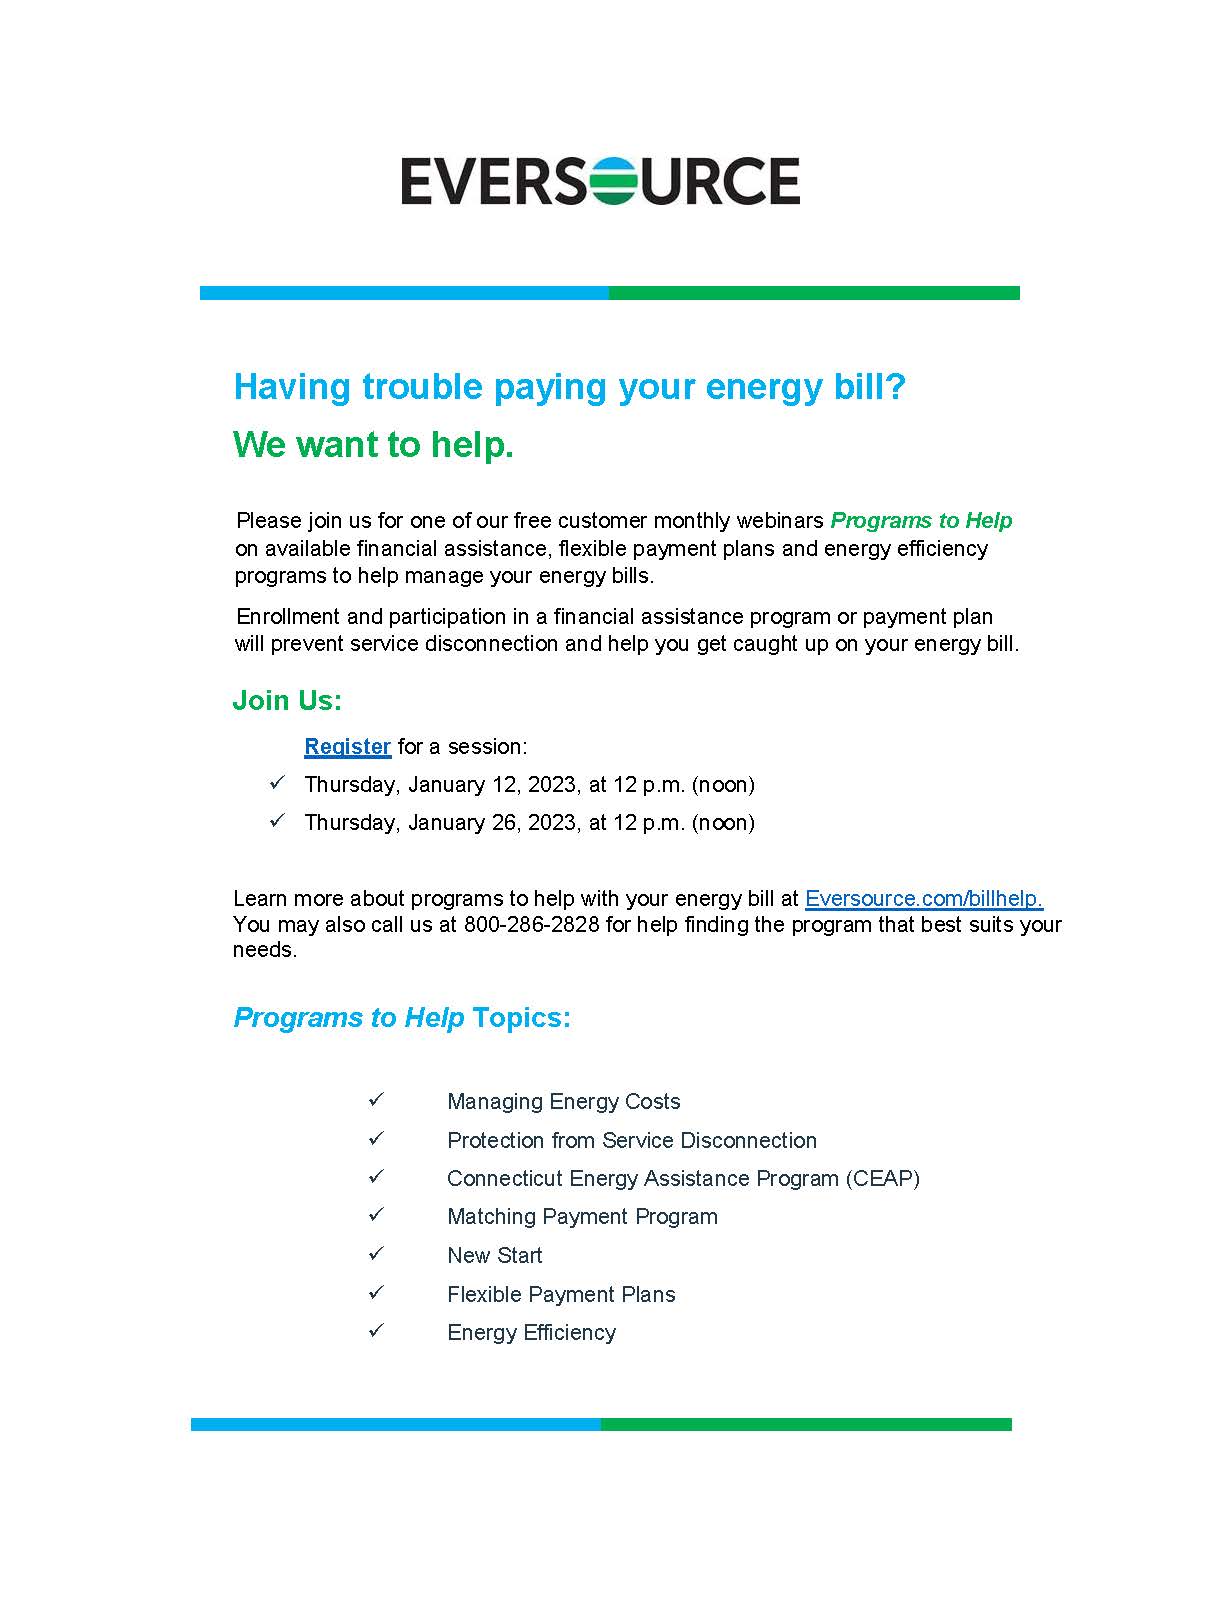 Eversource Webinars_ Programs to Help with Energy Bills_Flyer_CT January 2023